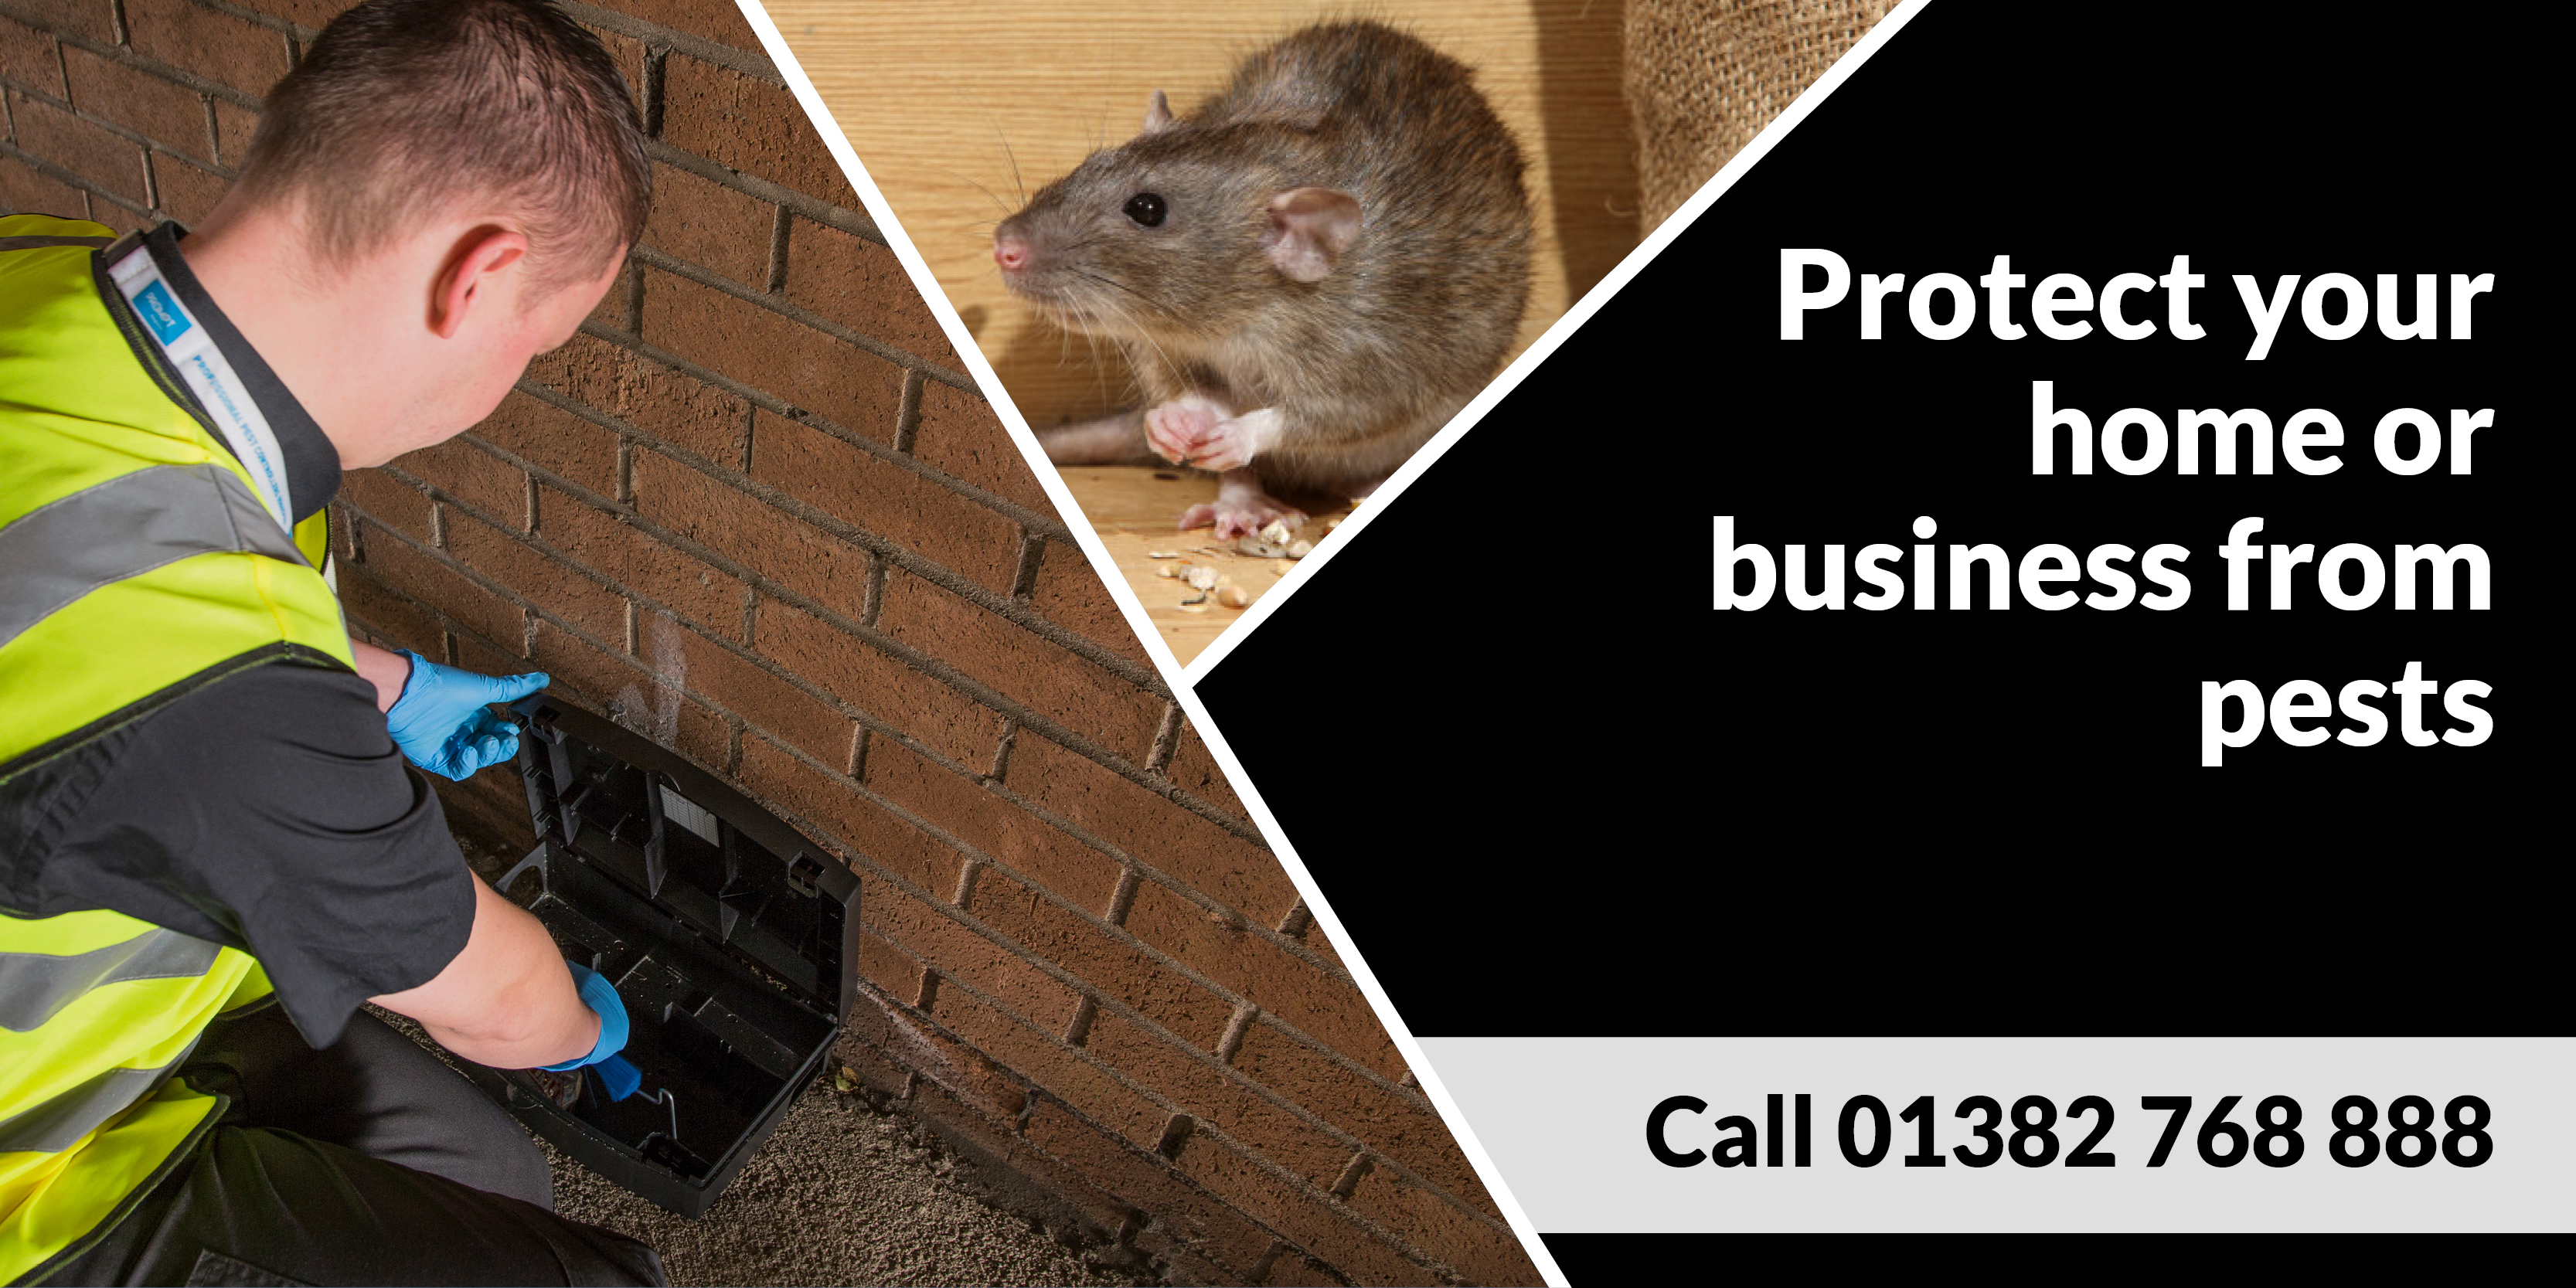 Pest Control Company Dundee Pest Solutions